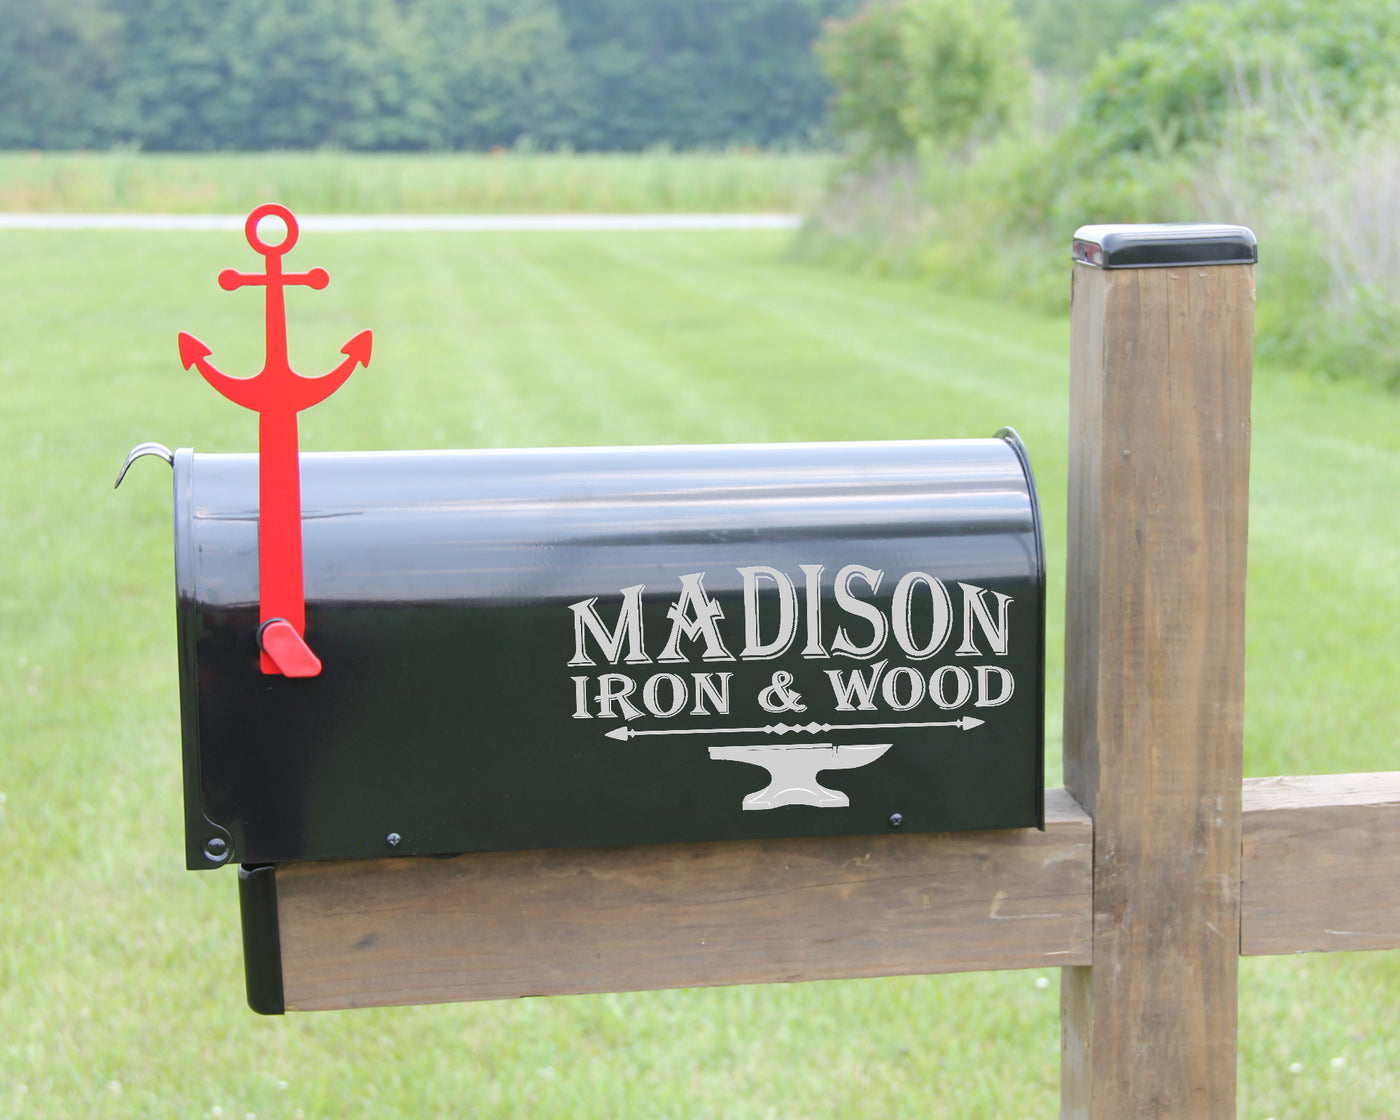 Anchor Mailbox Flag - Madison Iron and Wood - Mailbox Post Decor - metal outdoor decor - Steel deocrations - american made products - veteran owned business products - fencing decorations - fencing supplies - custom wall decorations - personalized wall signs - steel - decorative post caps - steel post caps - metal post caps - brackets - structural brackets - home improvement - easter - easter decorations - easter gift - easter yard decor